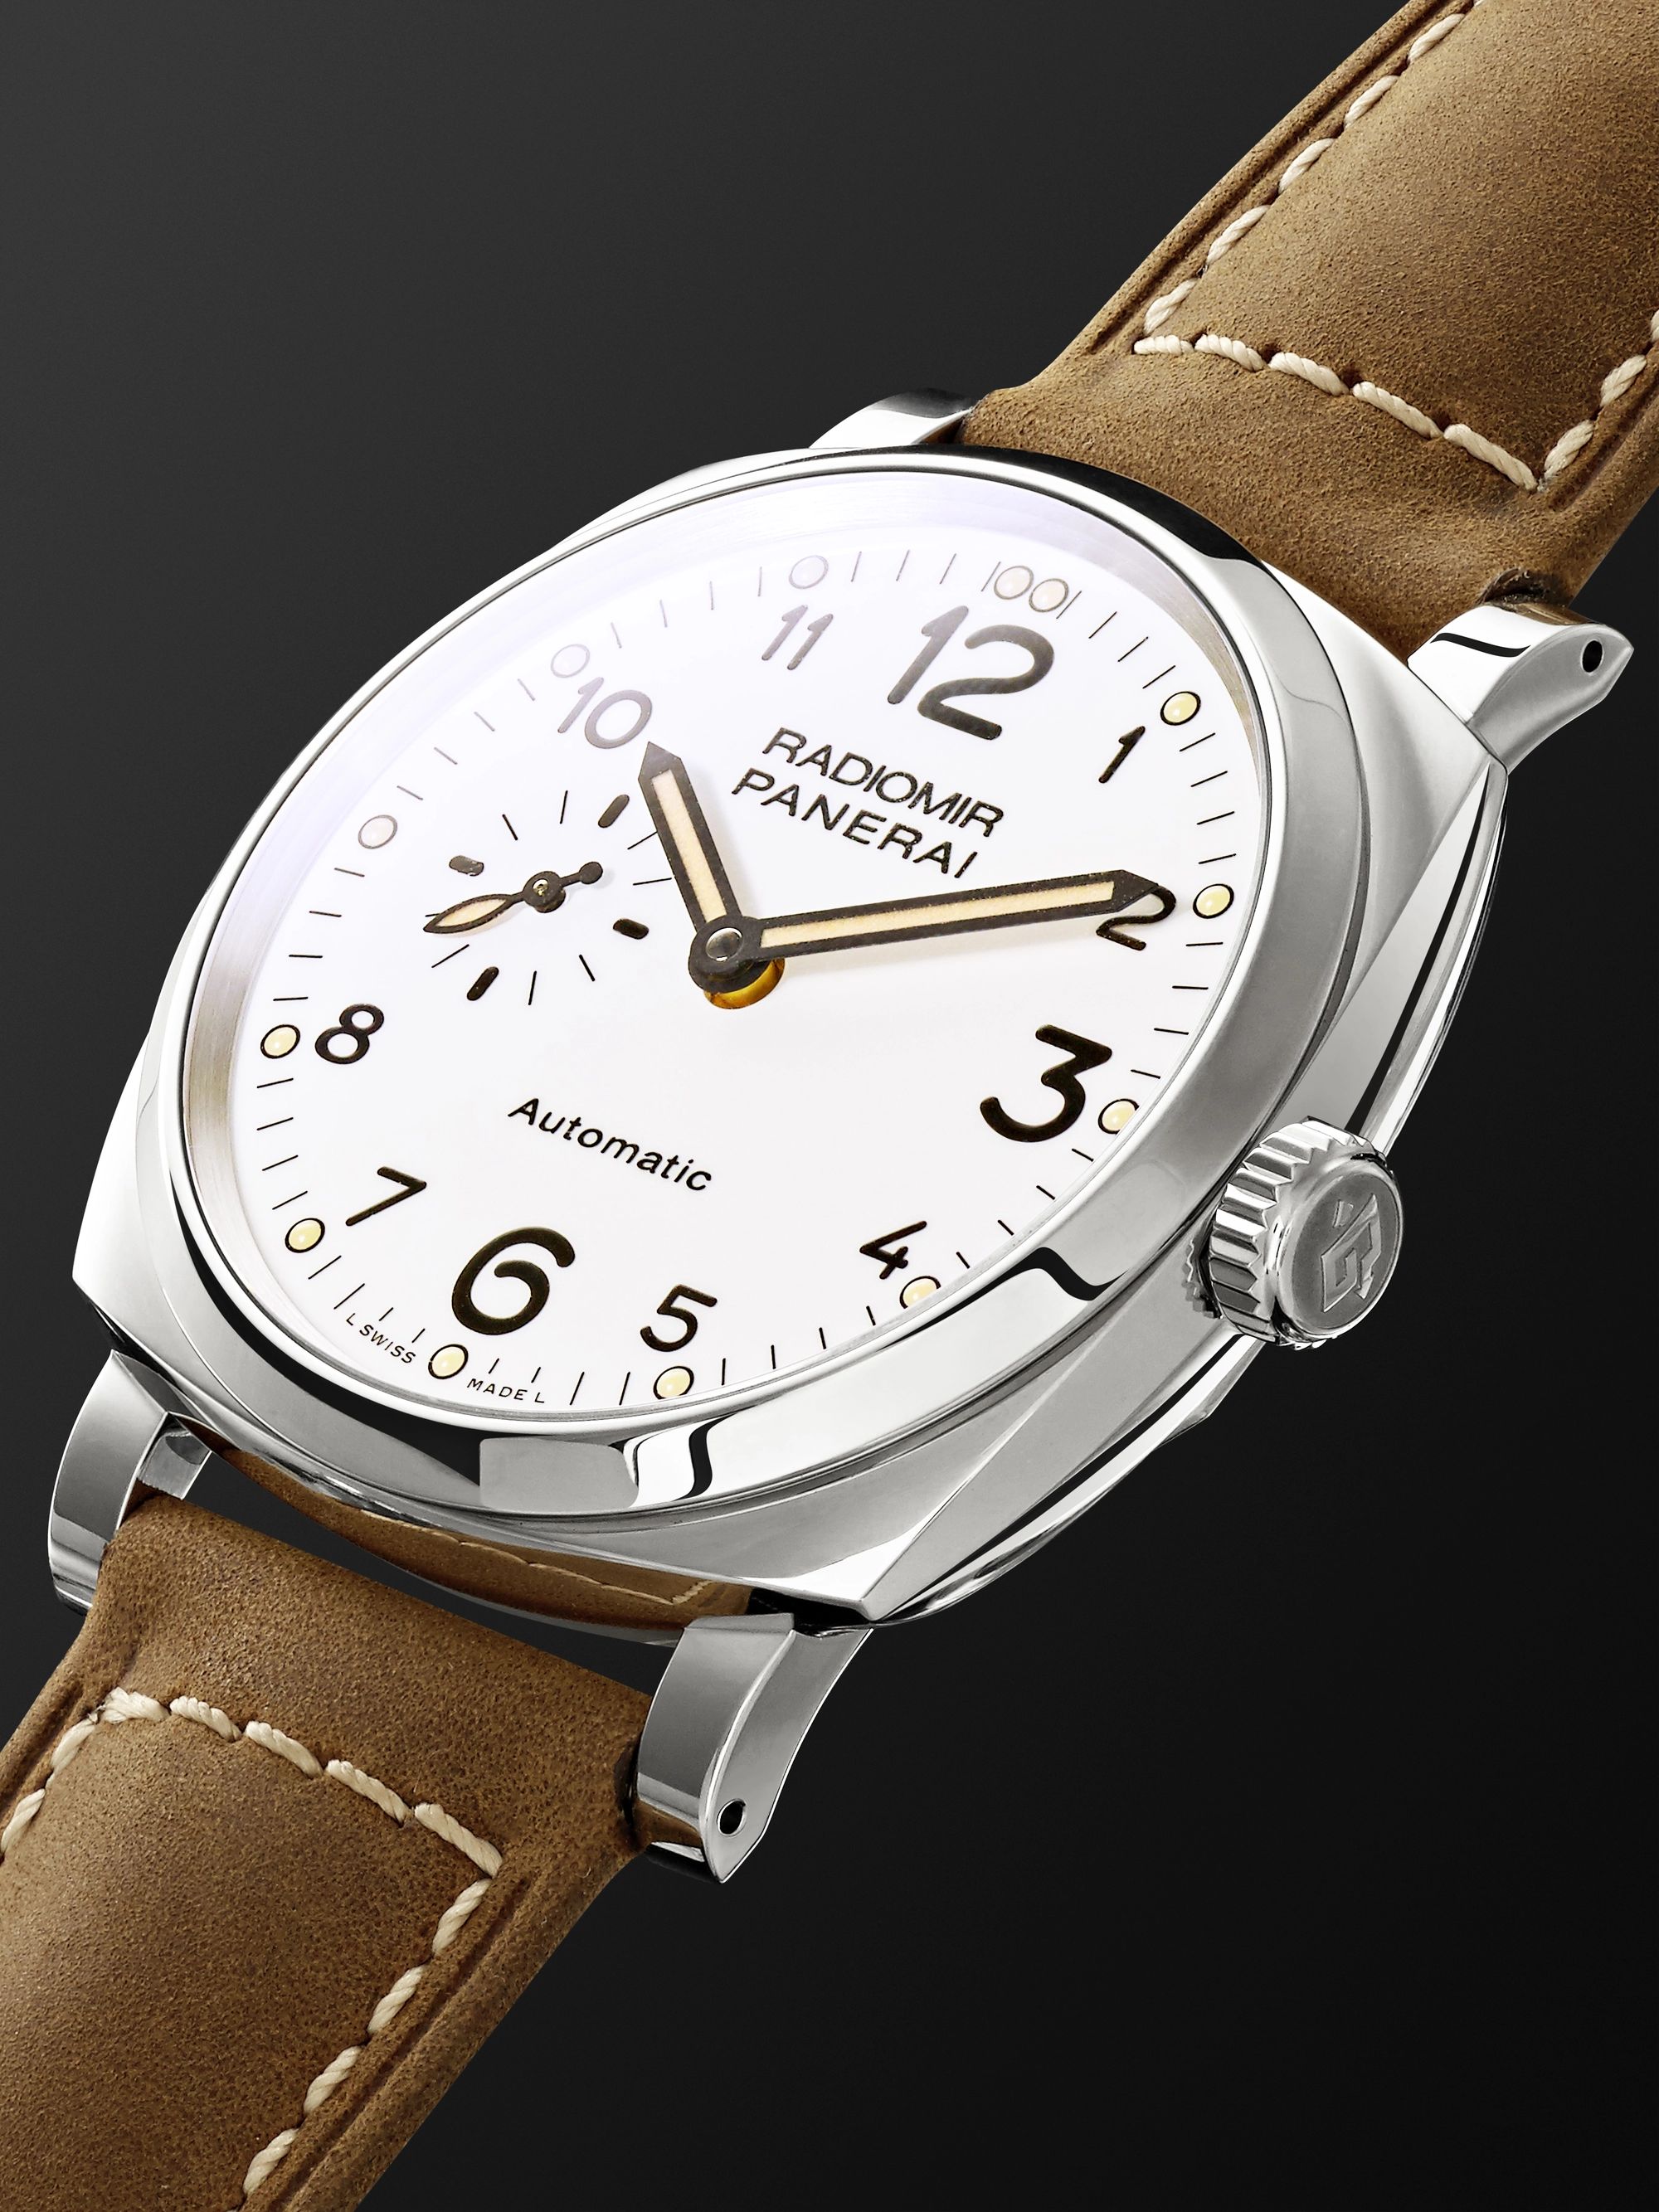 PANERAI Radiomir Automatic 42mm Stainless Steel and Leather Watch, Ref. No. PAM00655